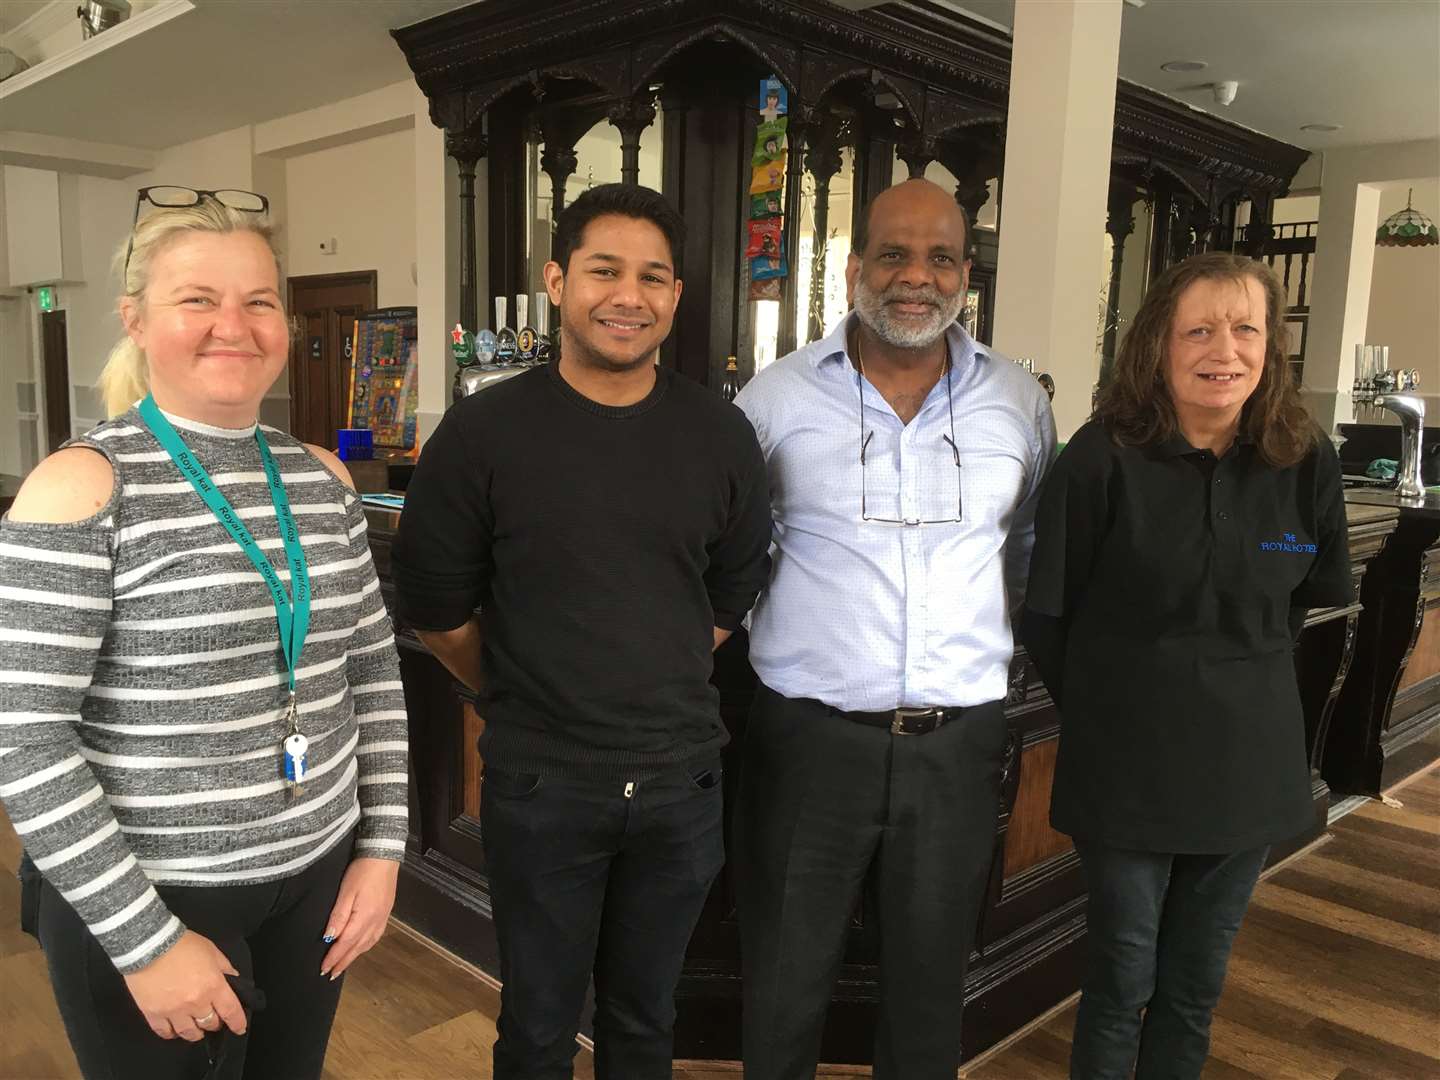 The Royal Hotel, Sheerness, has new owners. Rashmi Dedigama, centre left, and his friend Peter Karan, are investing £600,000 in the prominent building and have welcomed back former staff Kat Cordier, left, as manager and Jill Gray. Picture: John Nurden